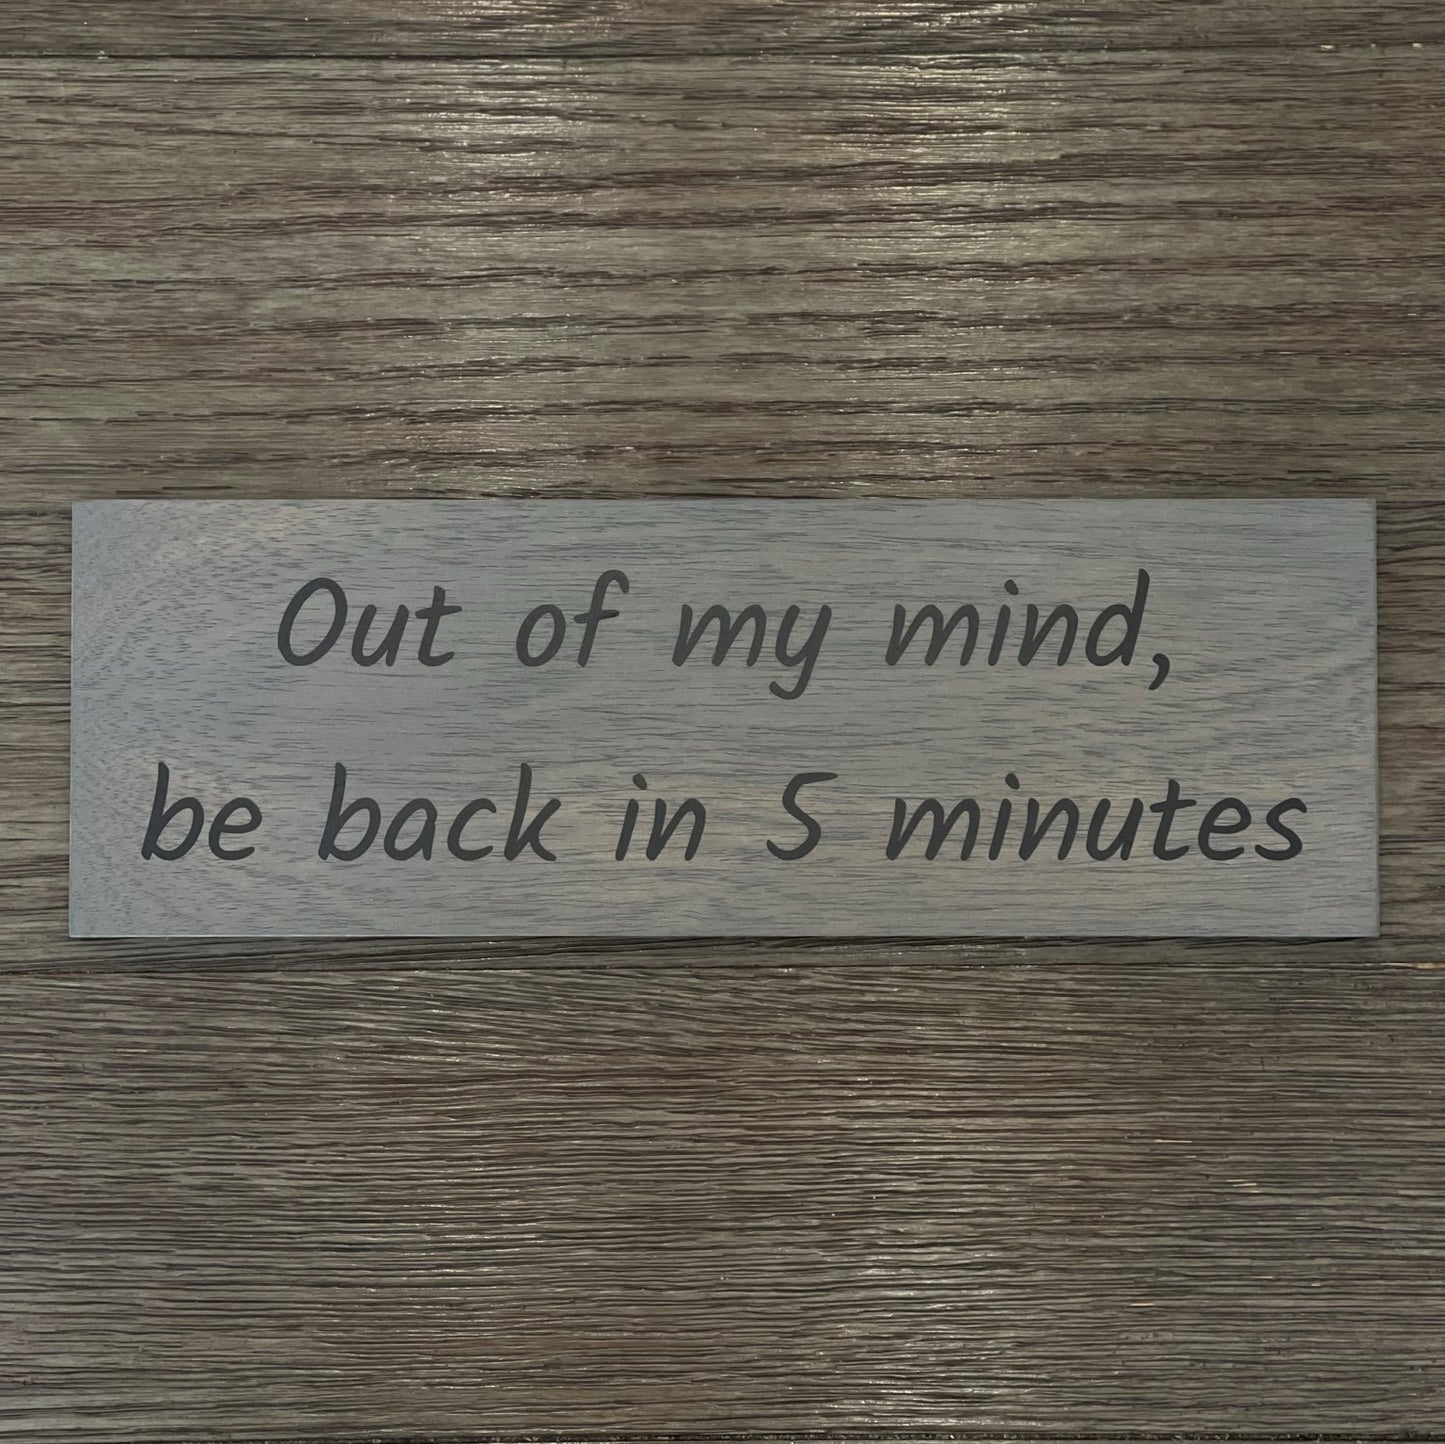 Out of My Mind, be Back in 5 Minutes - Funny Sign - Wall Decor - Bar Wall Art - Wooden Sign